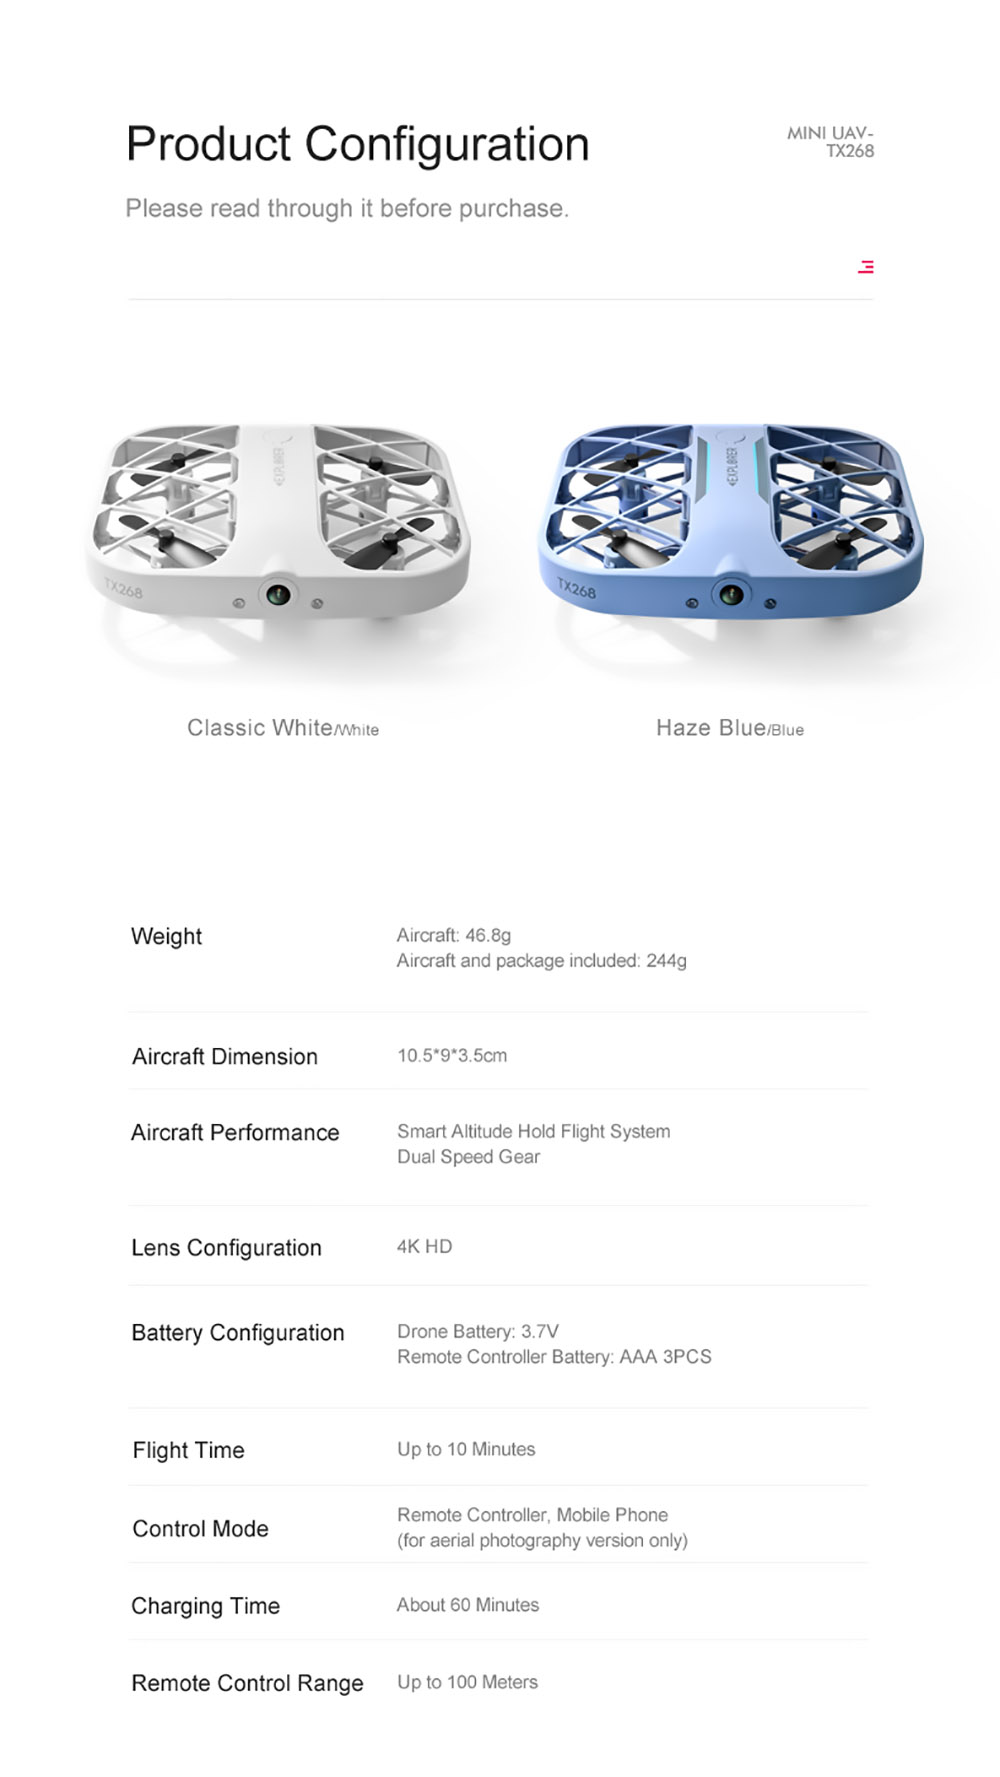 JJRC H107 Mini RC Drone Dual Speed Headless Altitude Hold Mode White without Camera Blue - 1 Battery